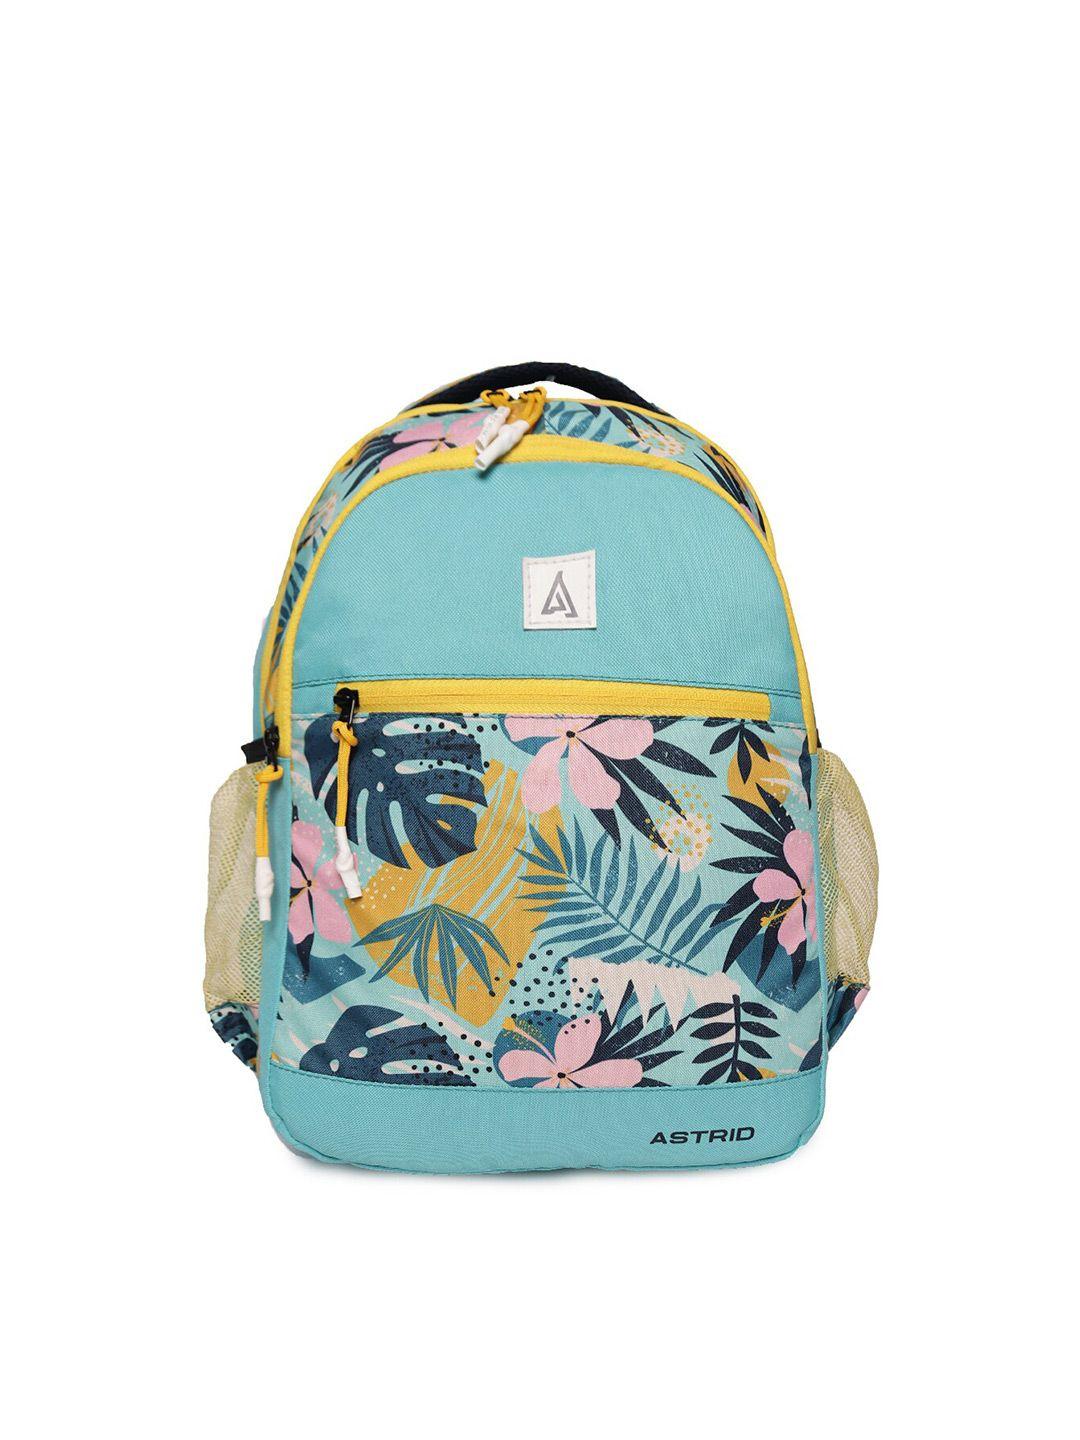 astrid women blue & yellow graphic backpack